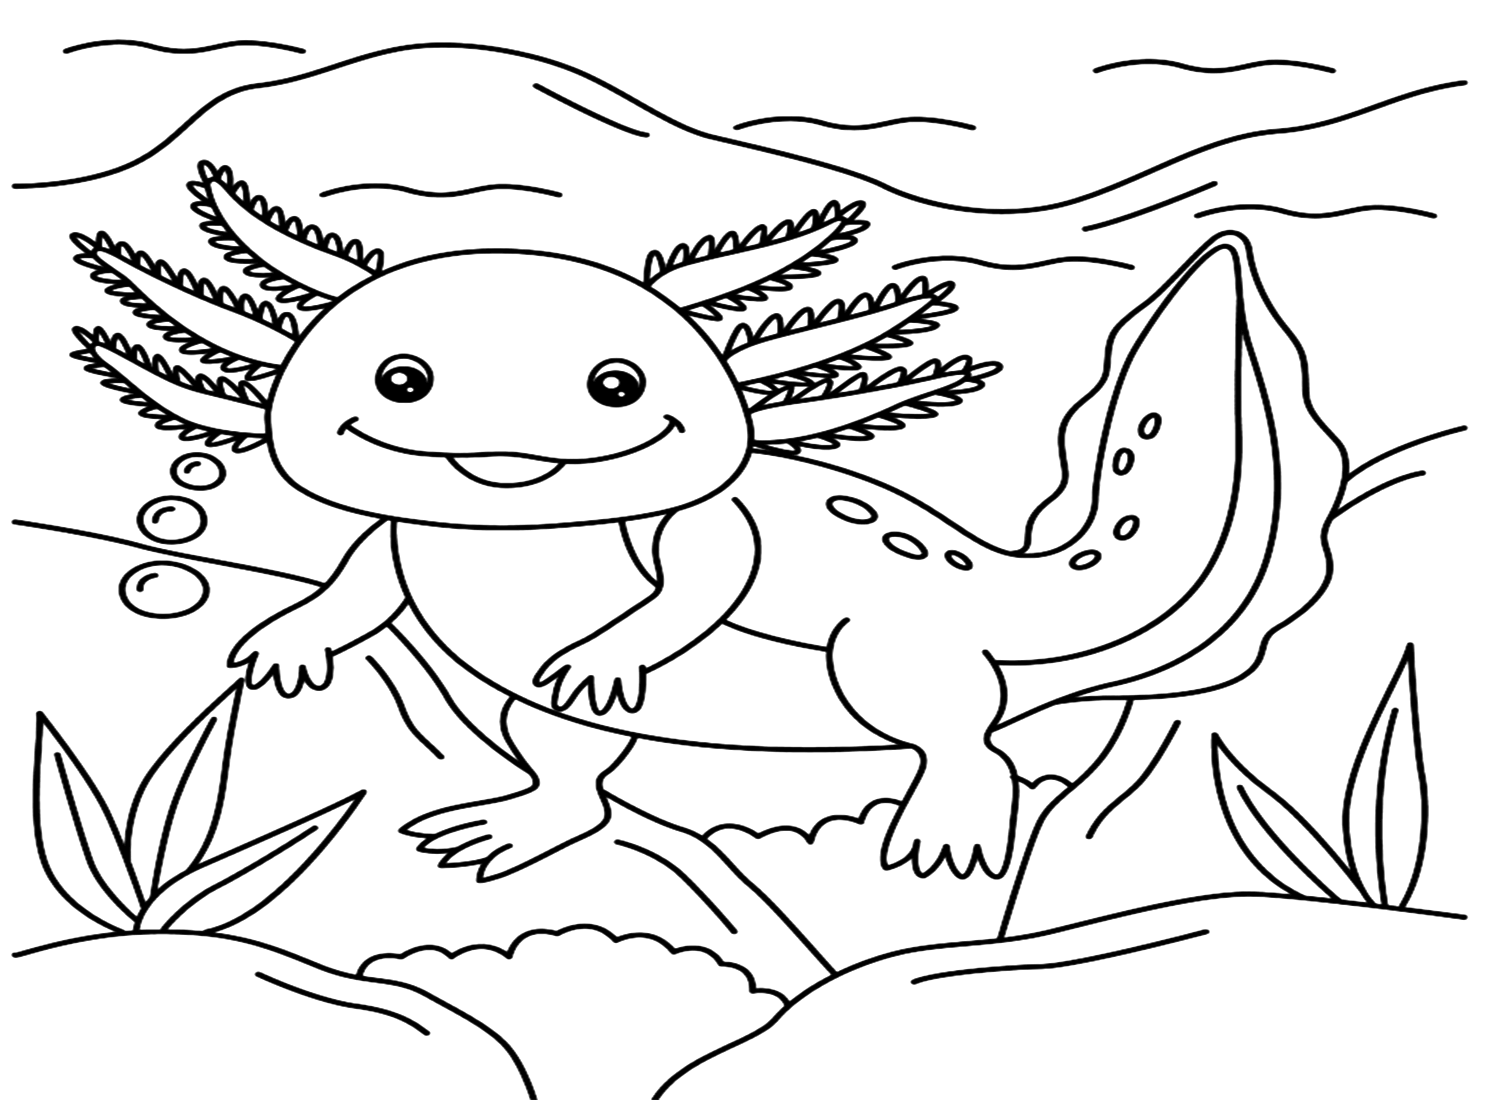 Axolotl Smiling Coloring Pages